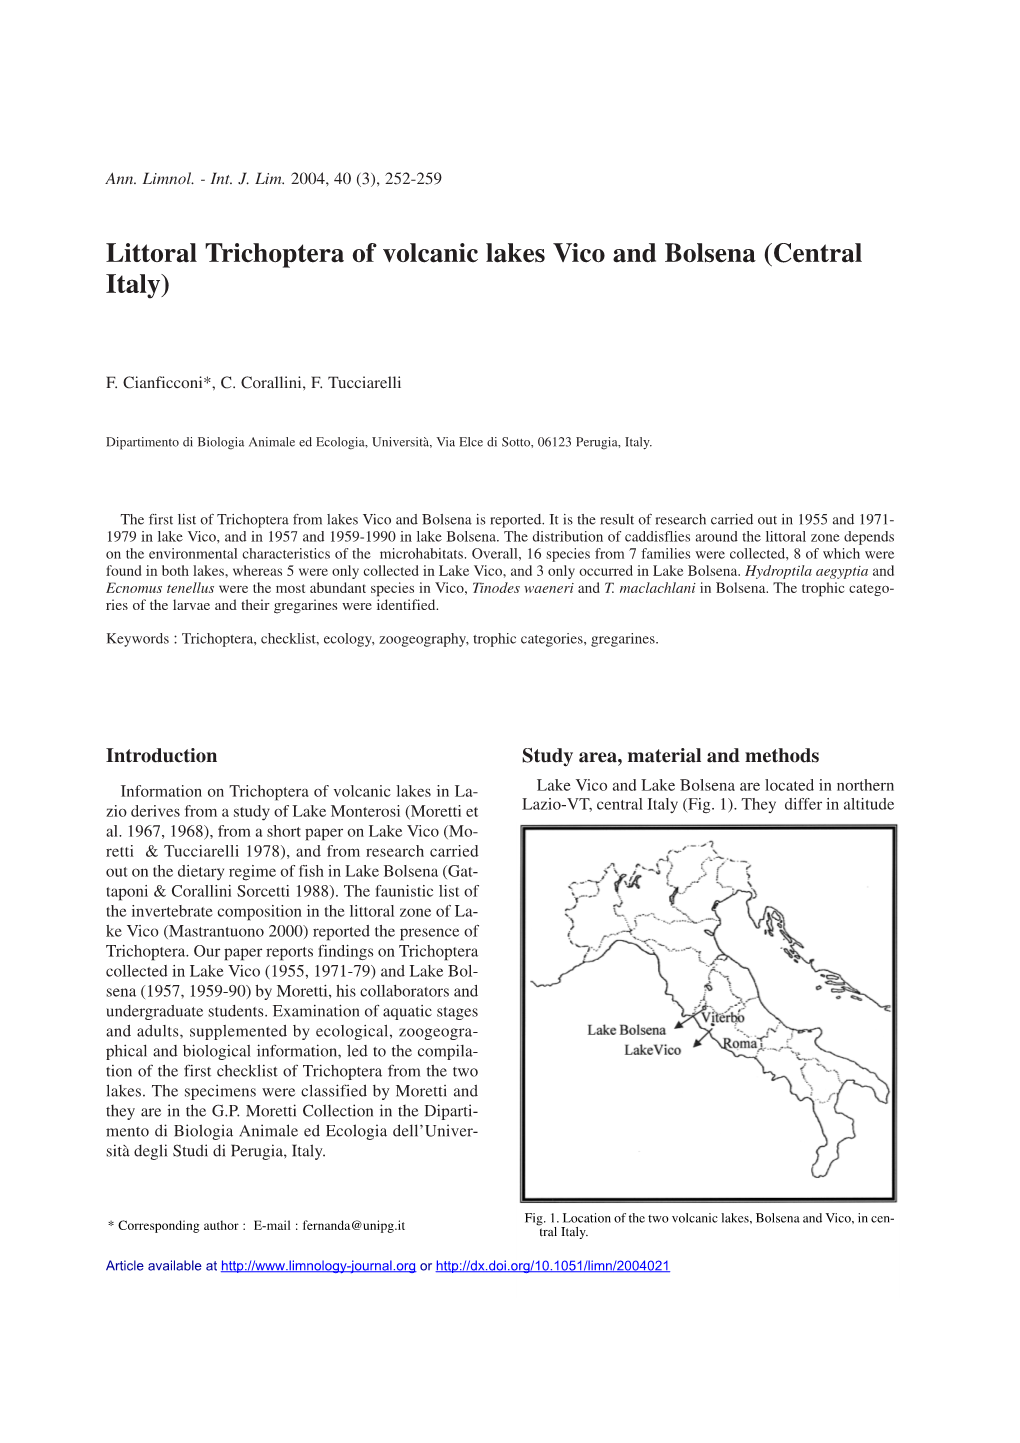 Littoral Trichoptera of Volcanic Lakes Vico and Bolsena (Central Italy)